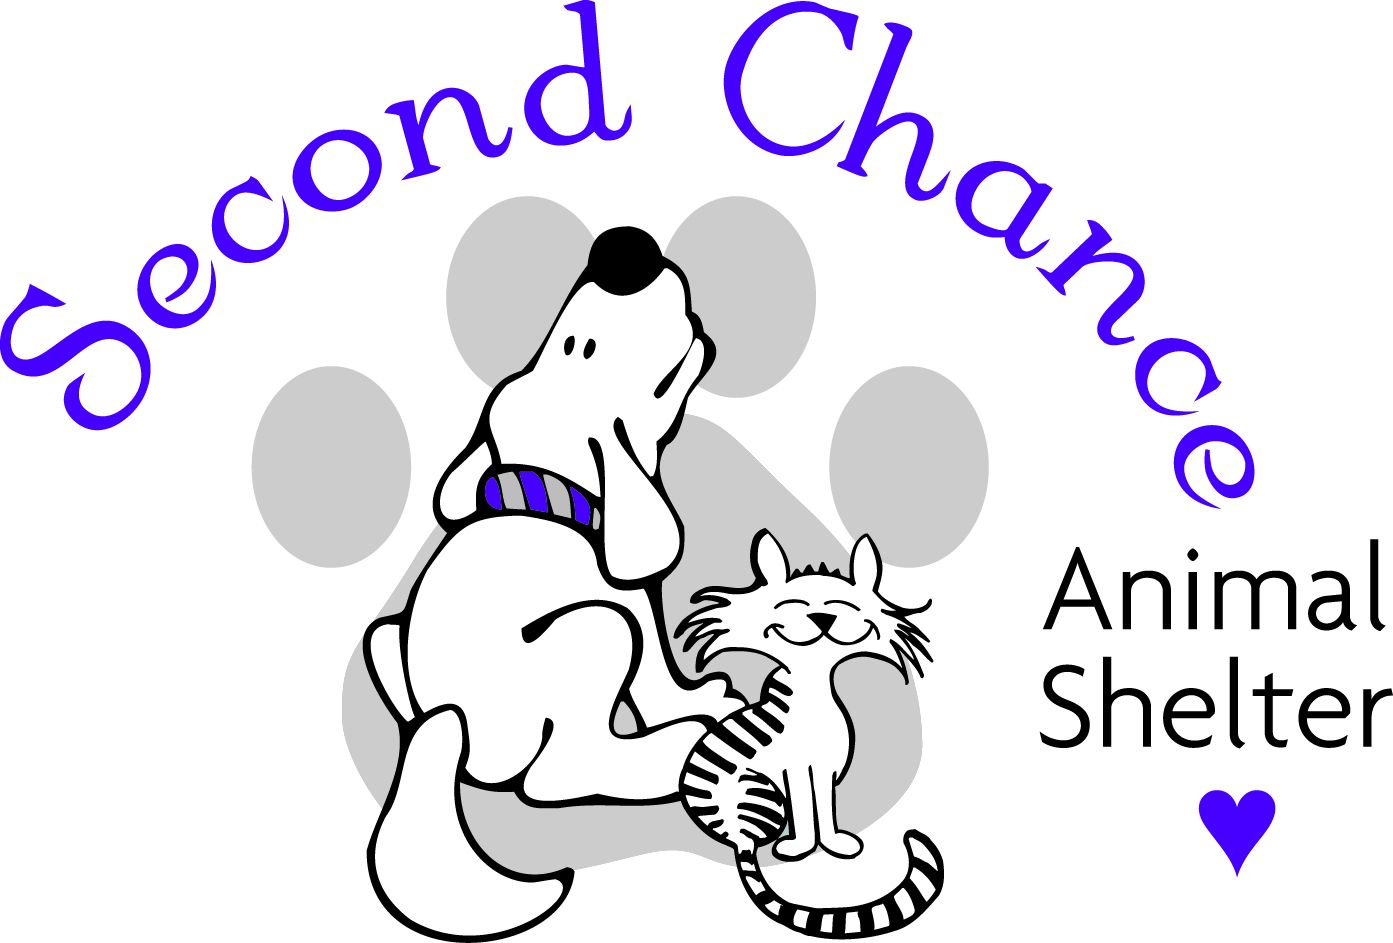 Second Chance Animal Shelter Inc 